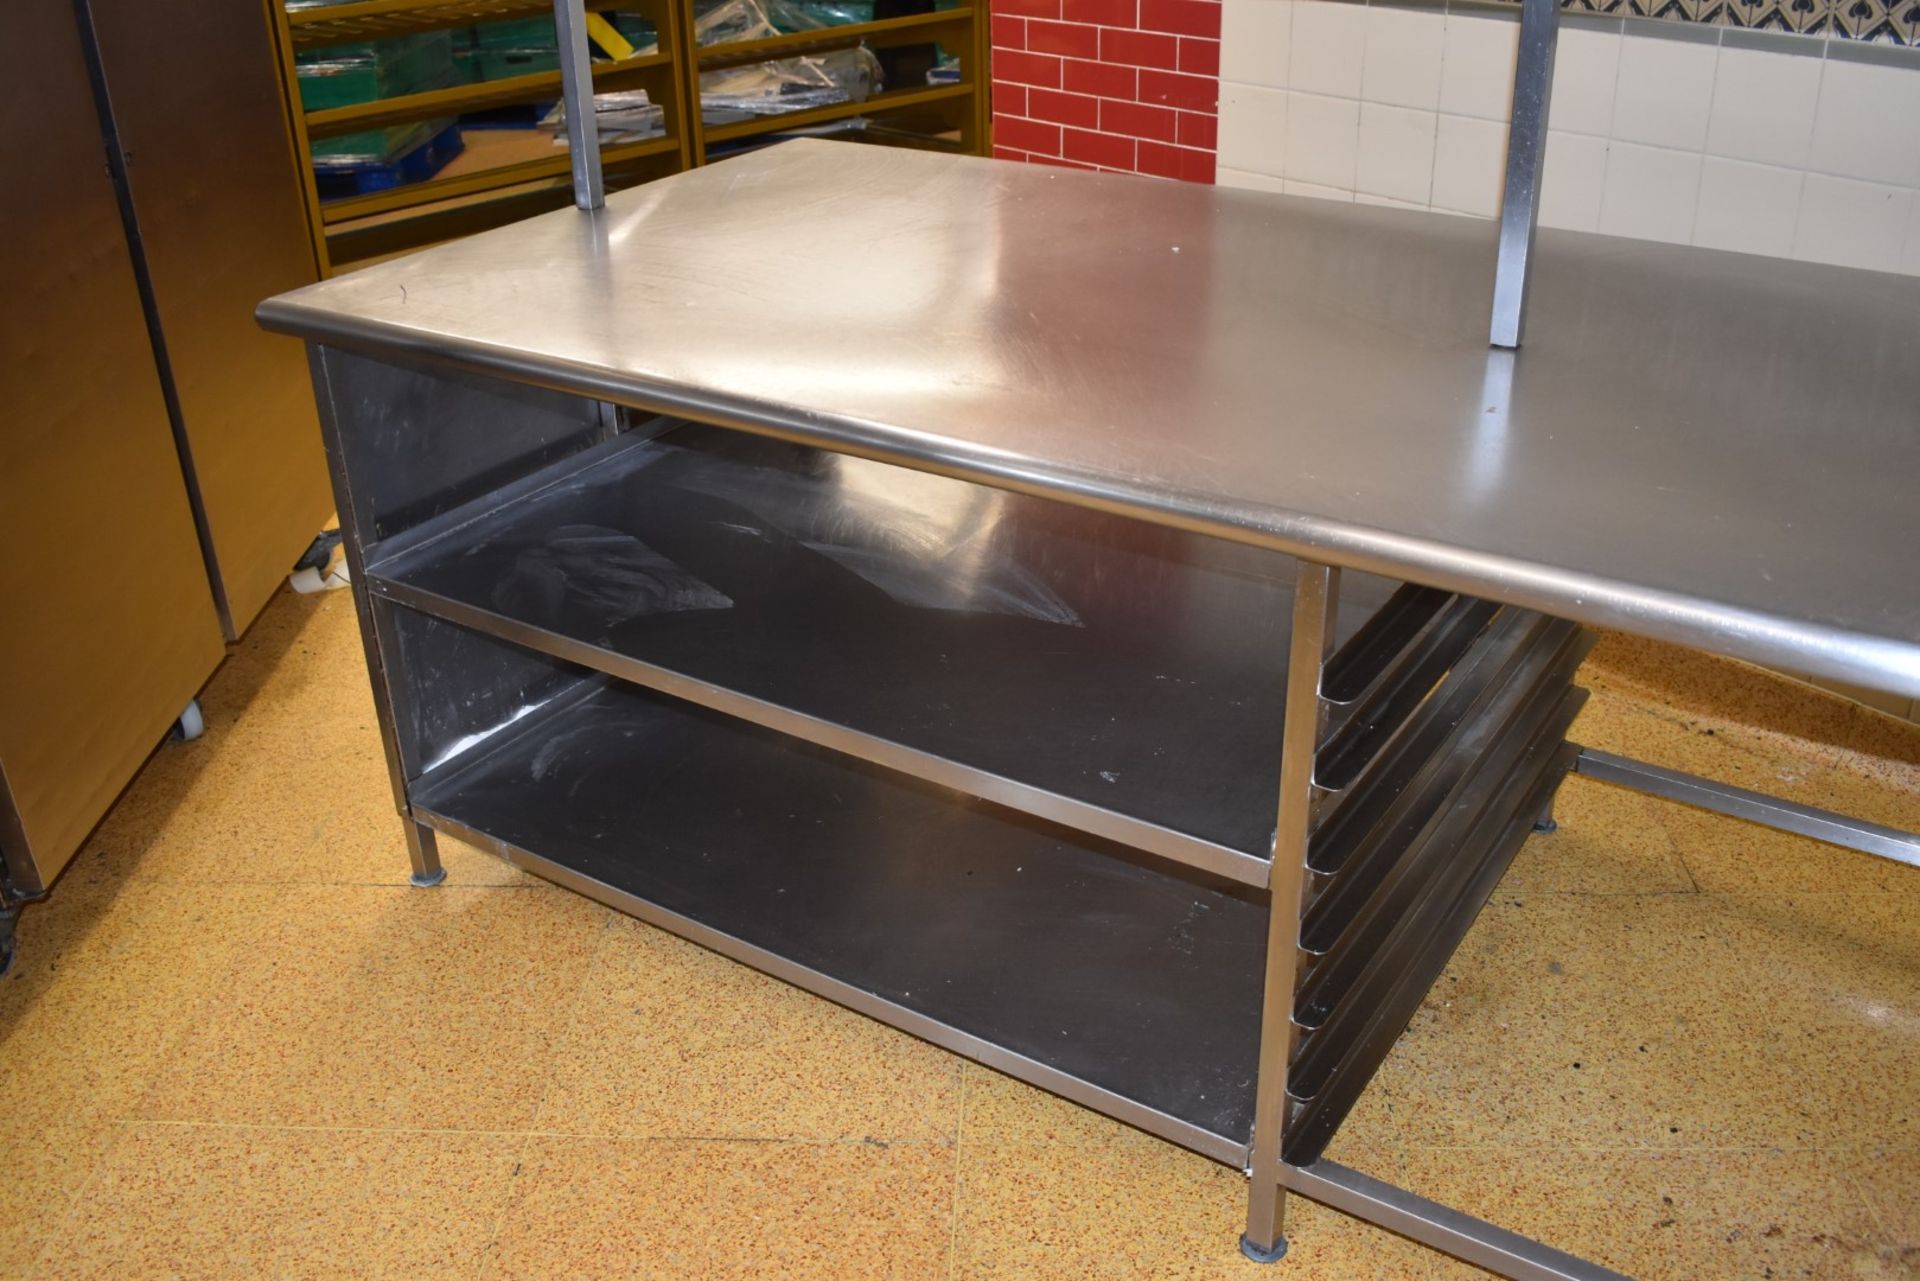 1 x Stainless Steel Commercial Kitchen Island - 10 x 4ft - Features Overhead Gastro Pan Holders, - Image 9 of 10